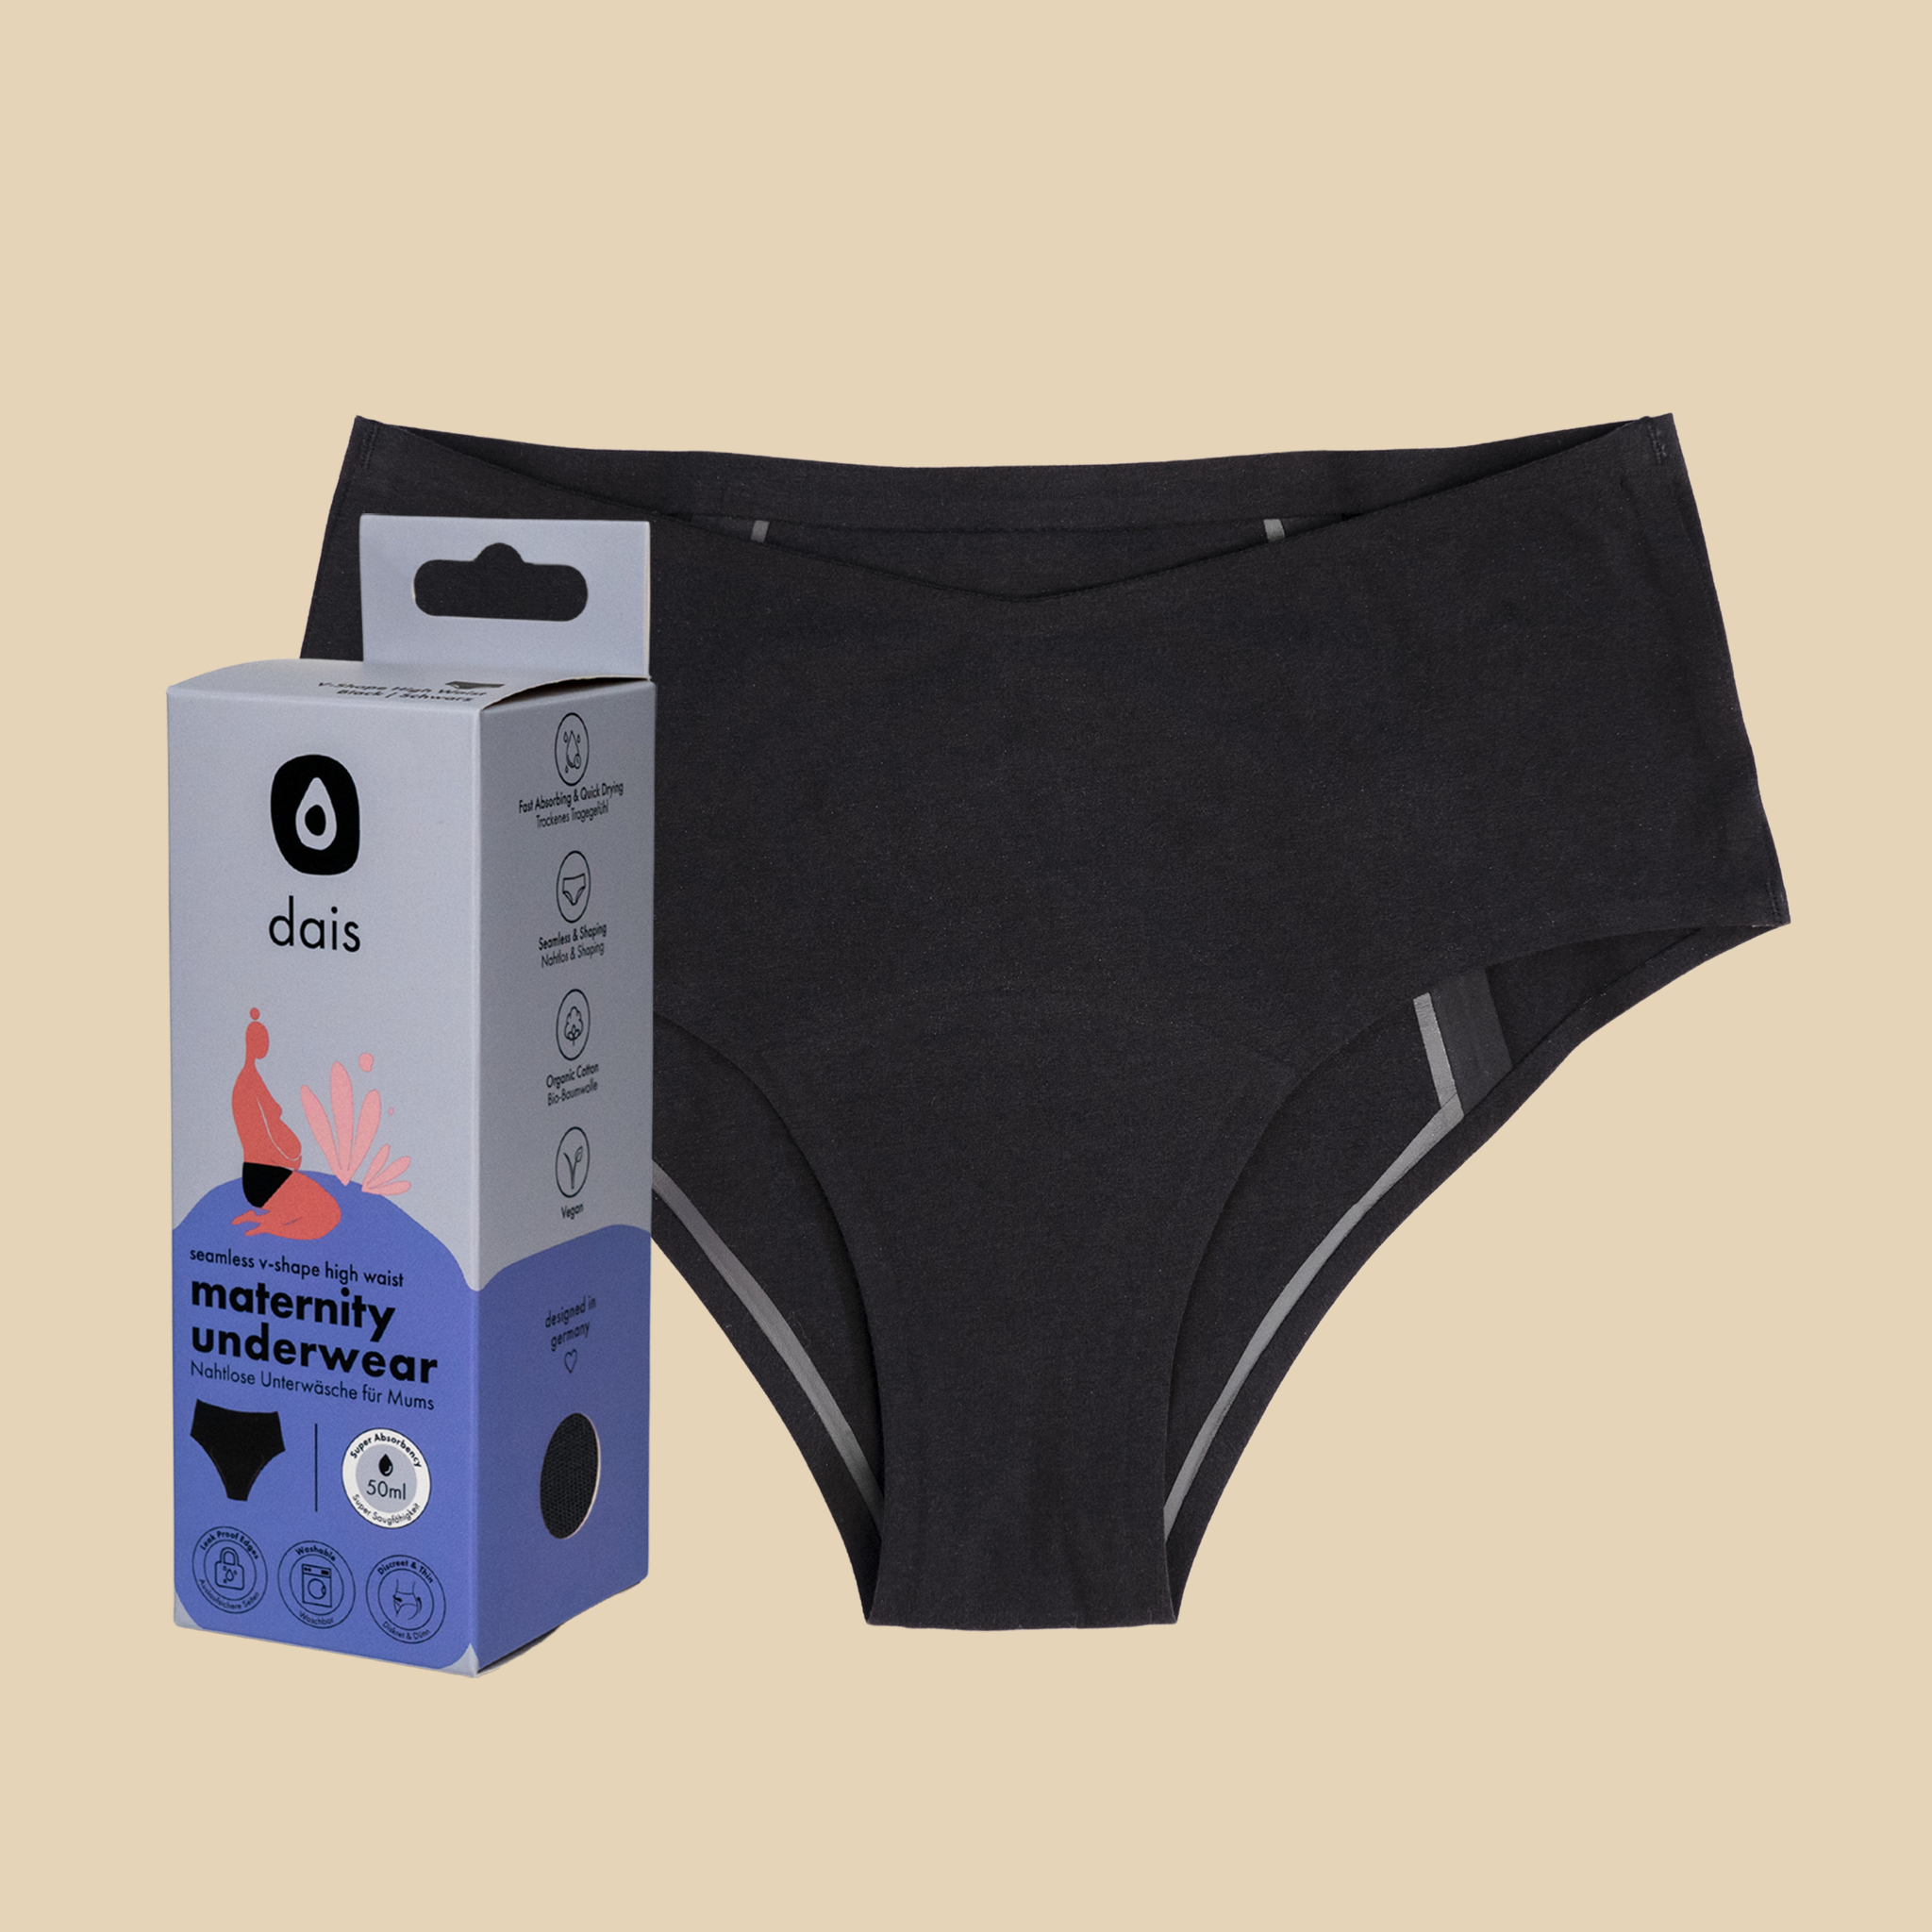 dais maternity absorbent underwear shown with modern packaging to the side. 